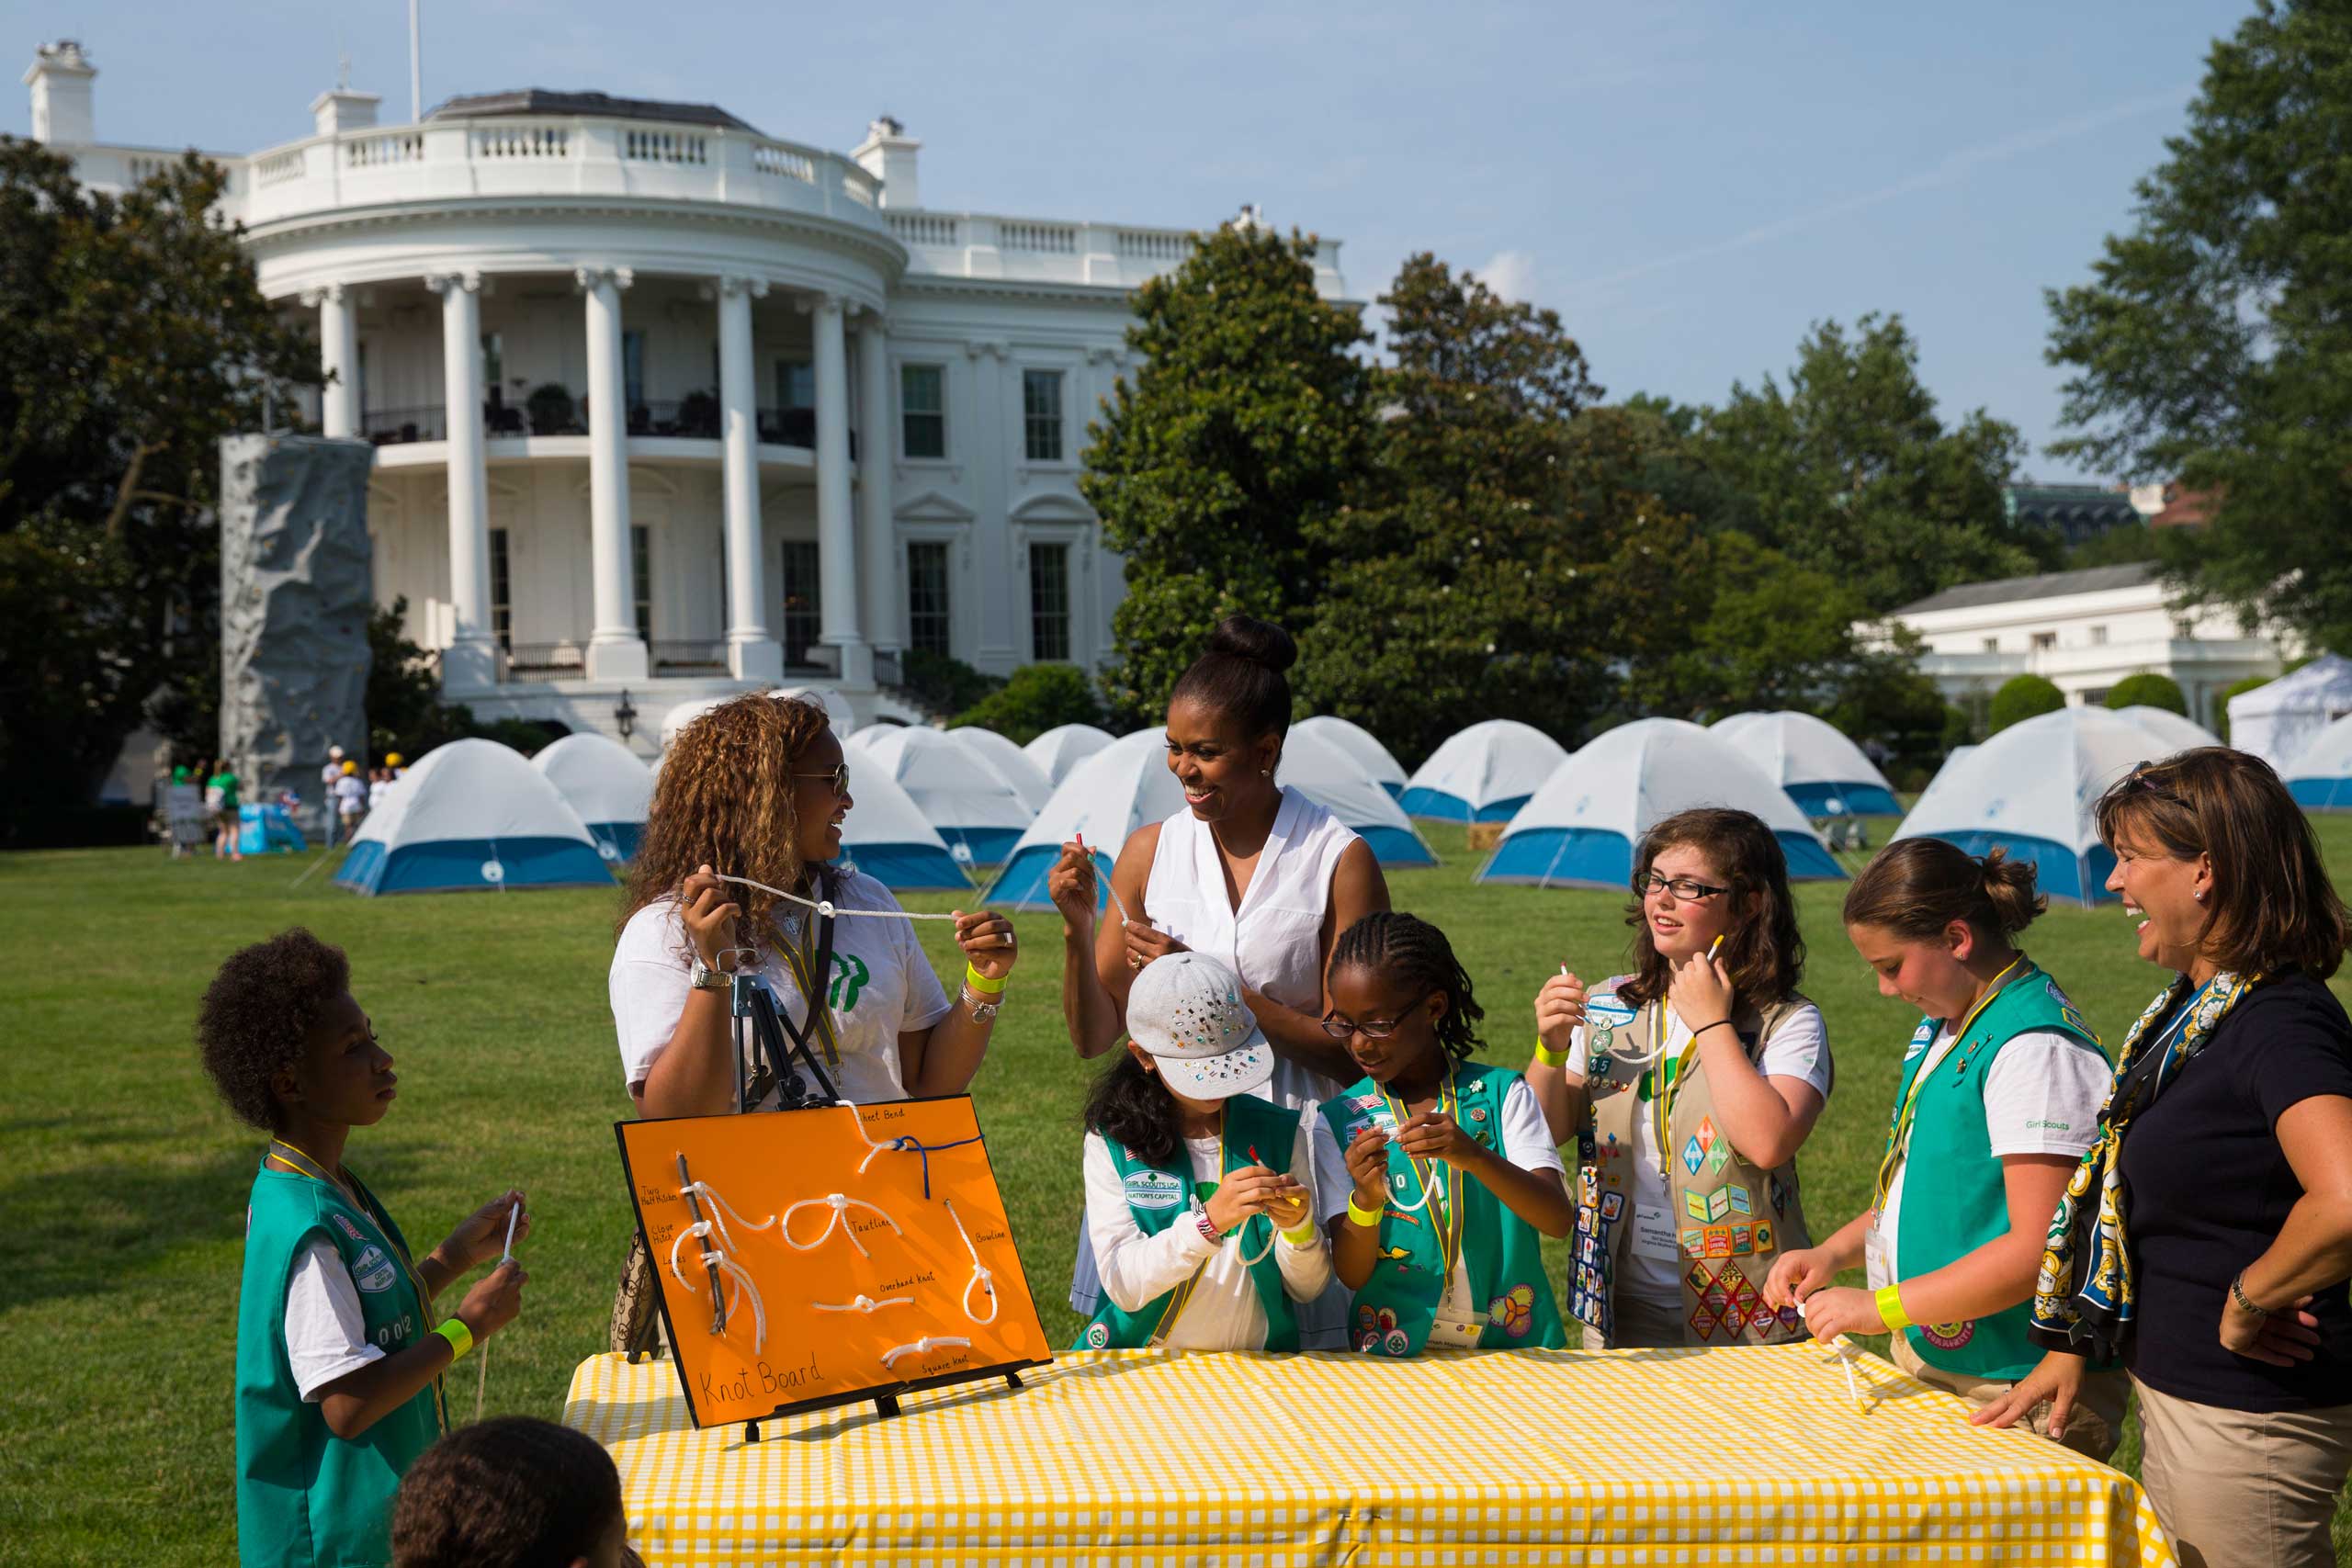 First lady Michelle Obama participates in a knot tying station during a Lets Move! event with Girl Scouts on the South Lawn of the White House in Washington, on June 30, 2015. (Evan Vucci—AP)